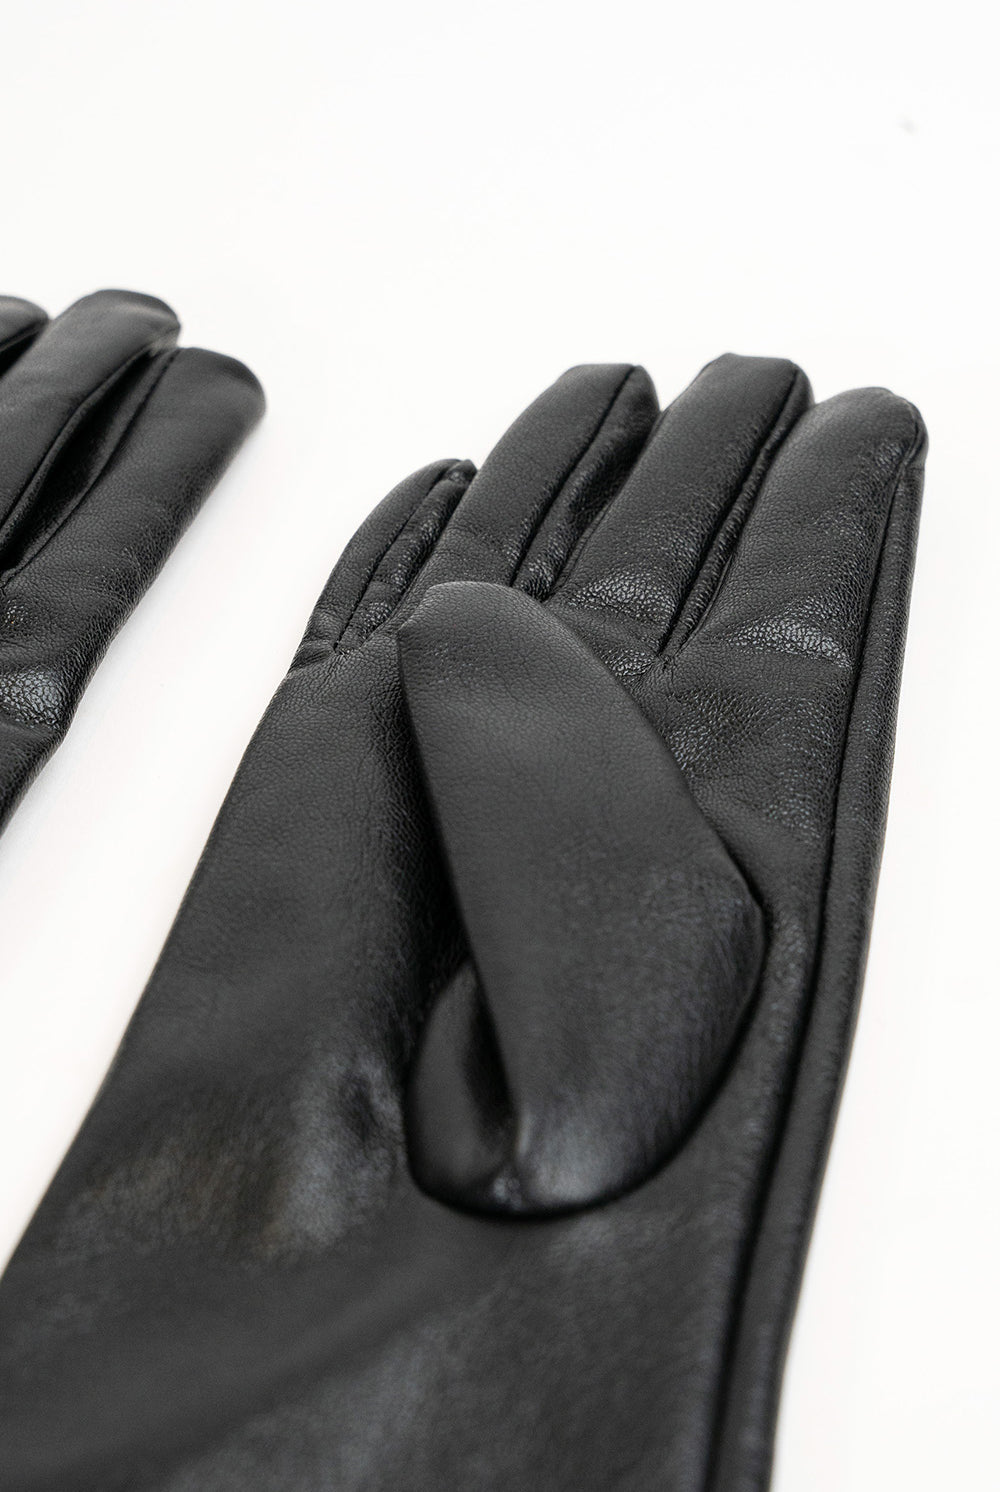 Faux leather Gloves in Black | over the elbow | Women's Accessories | Long Gloves | Autumn | Winter | Party | Occasion | Halloween | Vegan